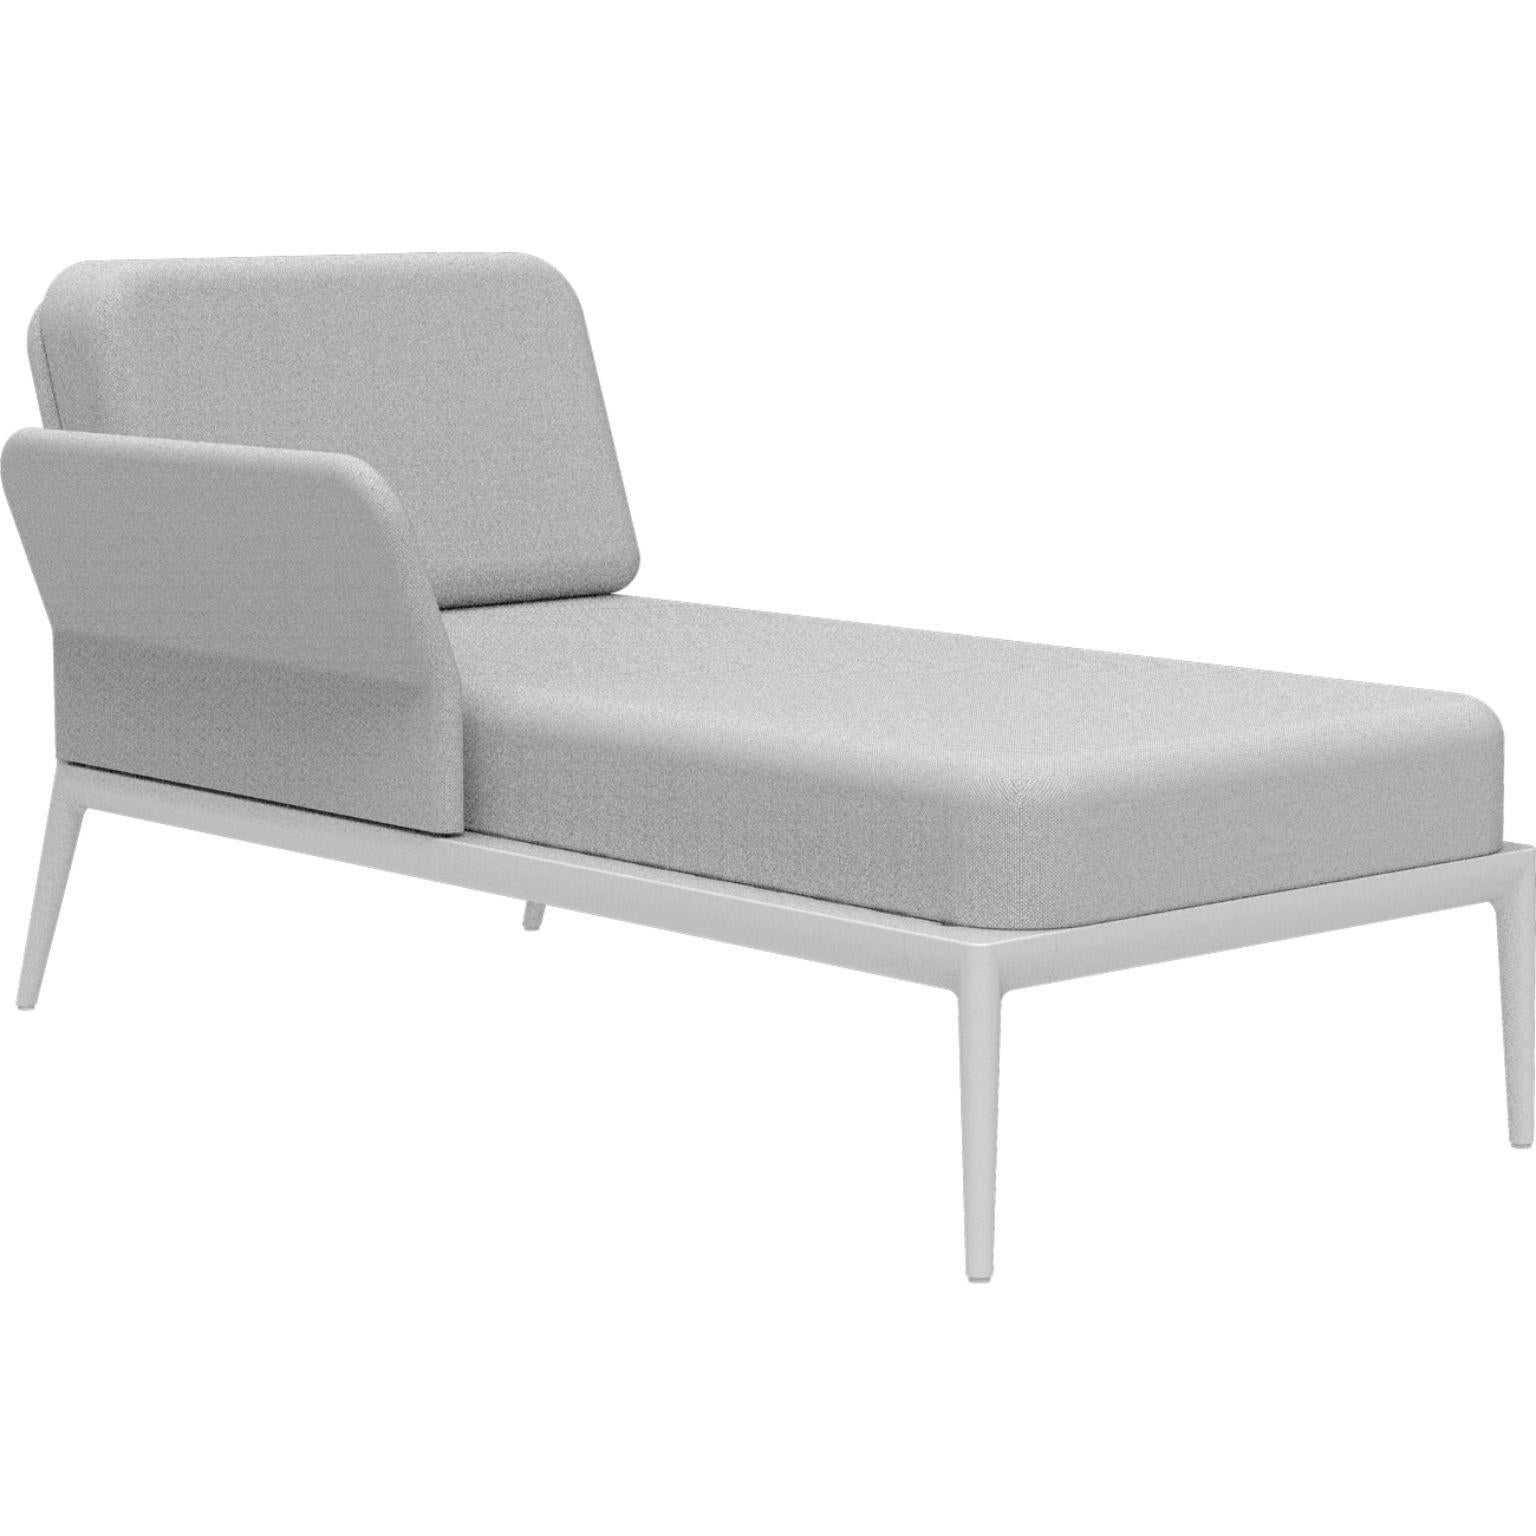 Cover White Right Chaise Longue by MOWEE
Dimensions: D 80 x W 155 x H 81 cm (seat height 42 cm).
Material: Aluminum and upholstery.
Weight: 28 kg.
Also available in different colors and finishes. Please contact us.

An unmistakable collection